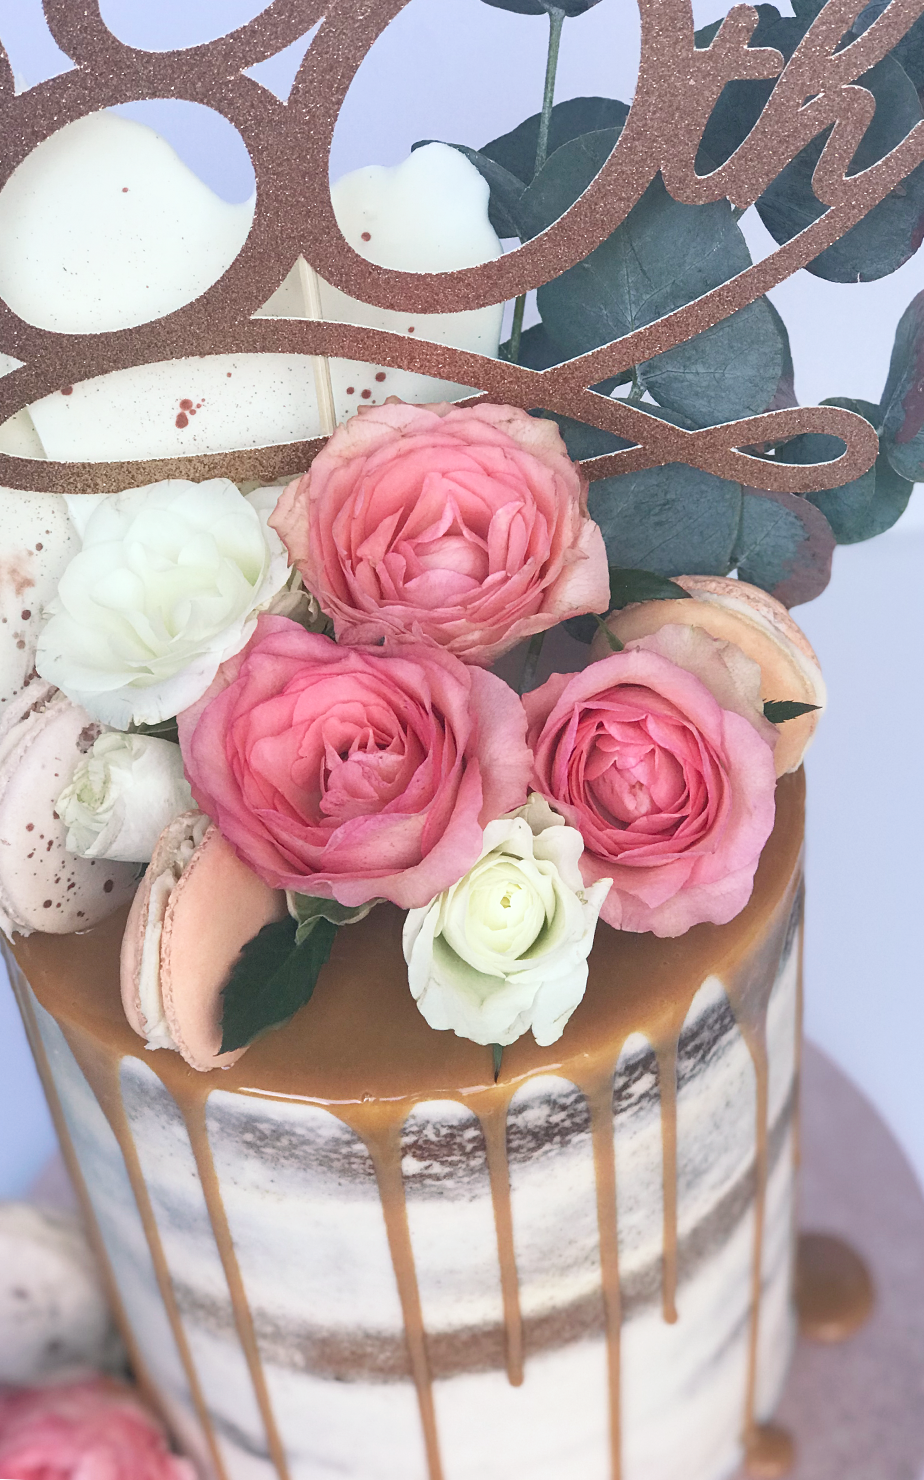 Pink Flower 2 Tier Drip 80th Birthday Cake | Baked by Nataleen